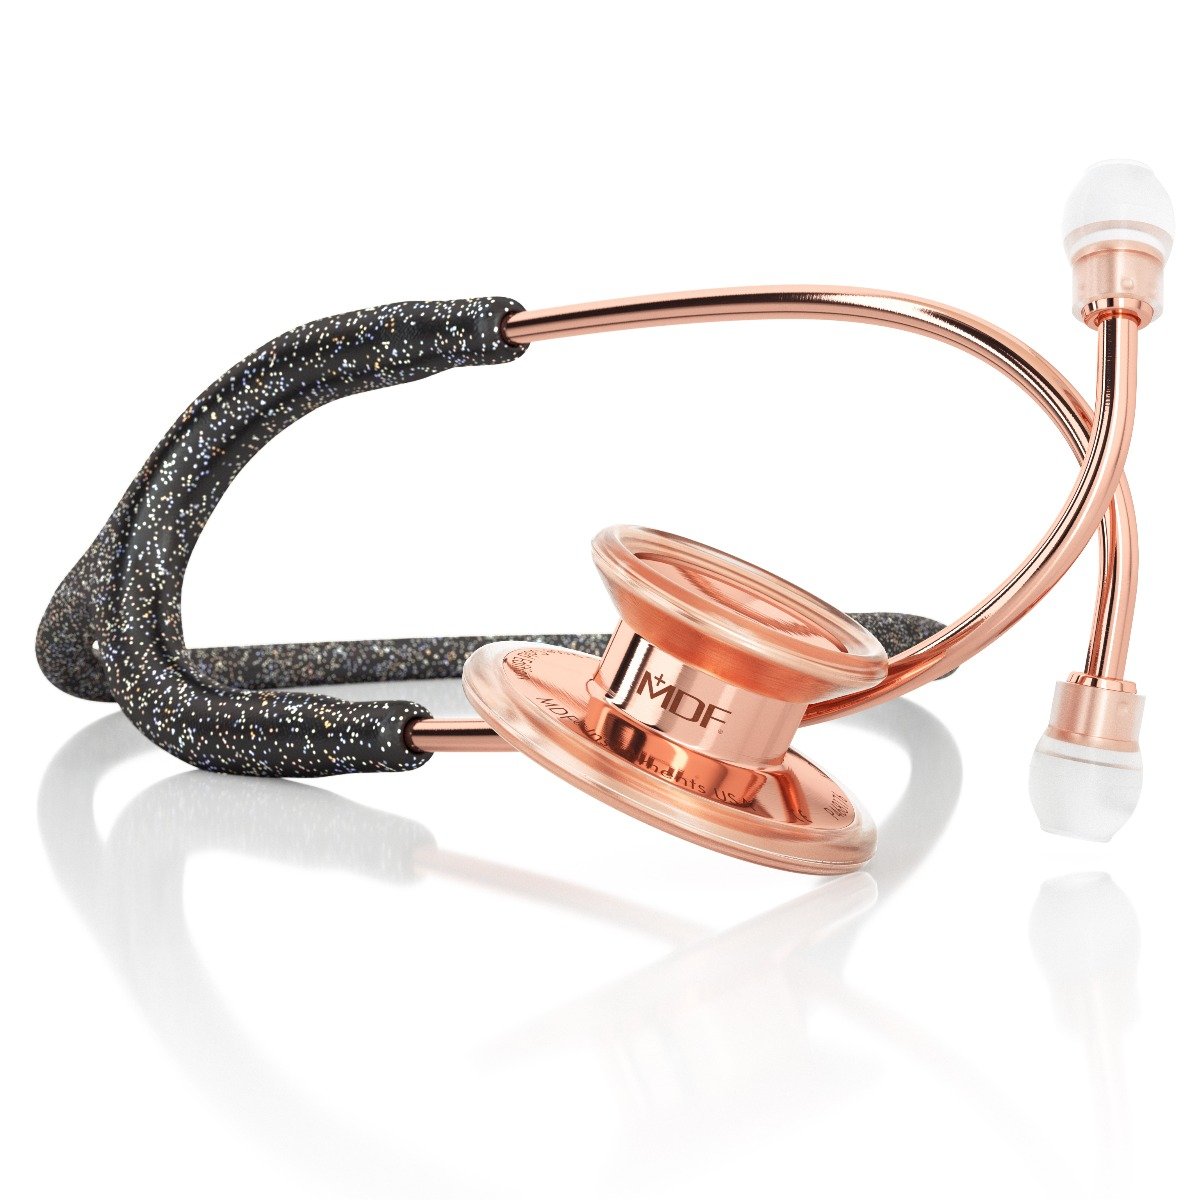 MDF® MD One® Stainless Steel Dual Head Stethoscope (MDF777) - Rose Gold and Black Glitter